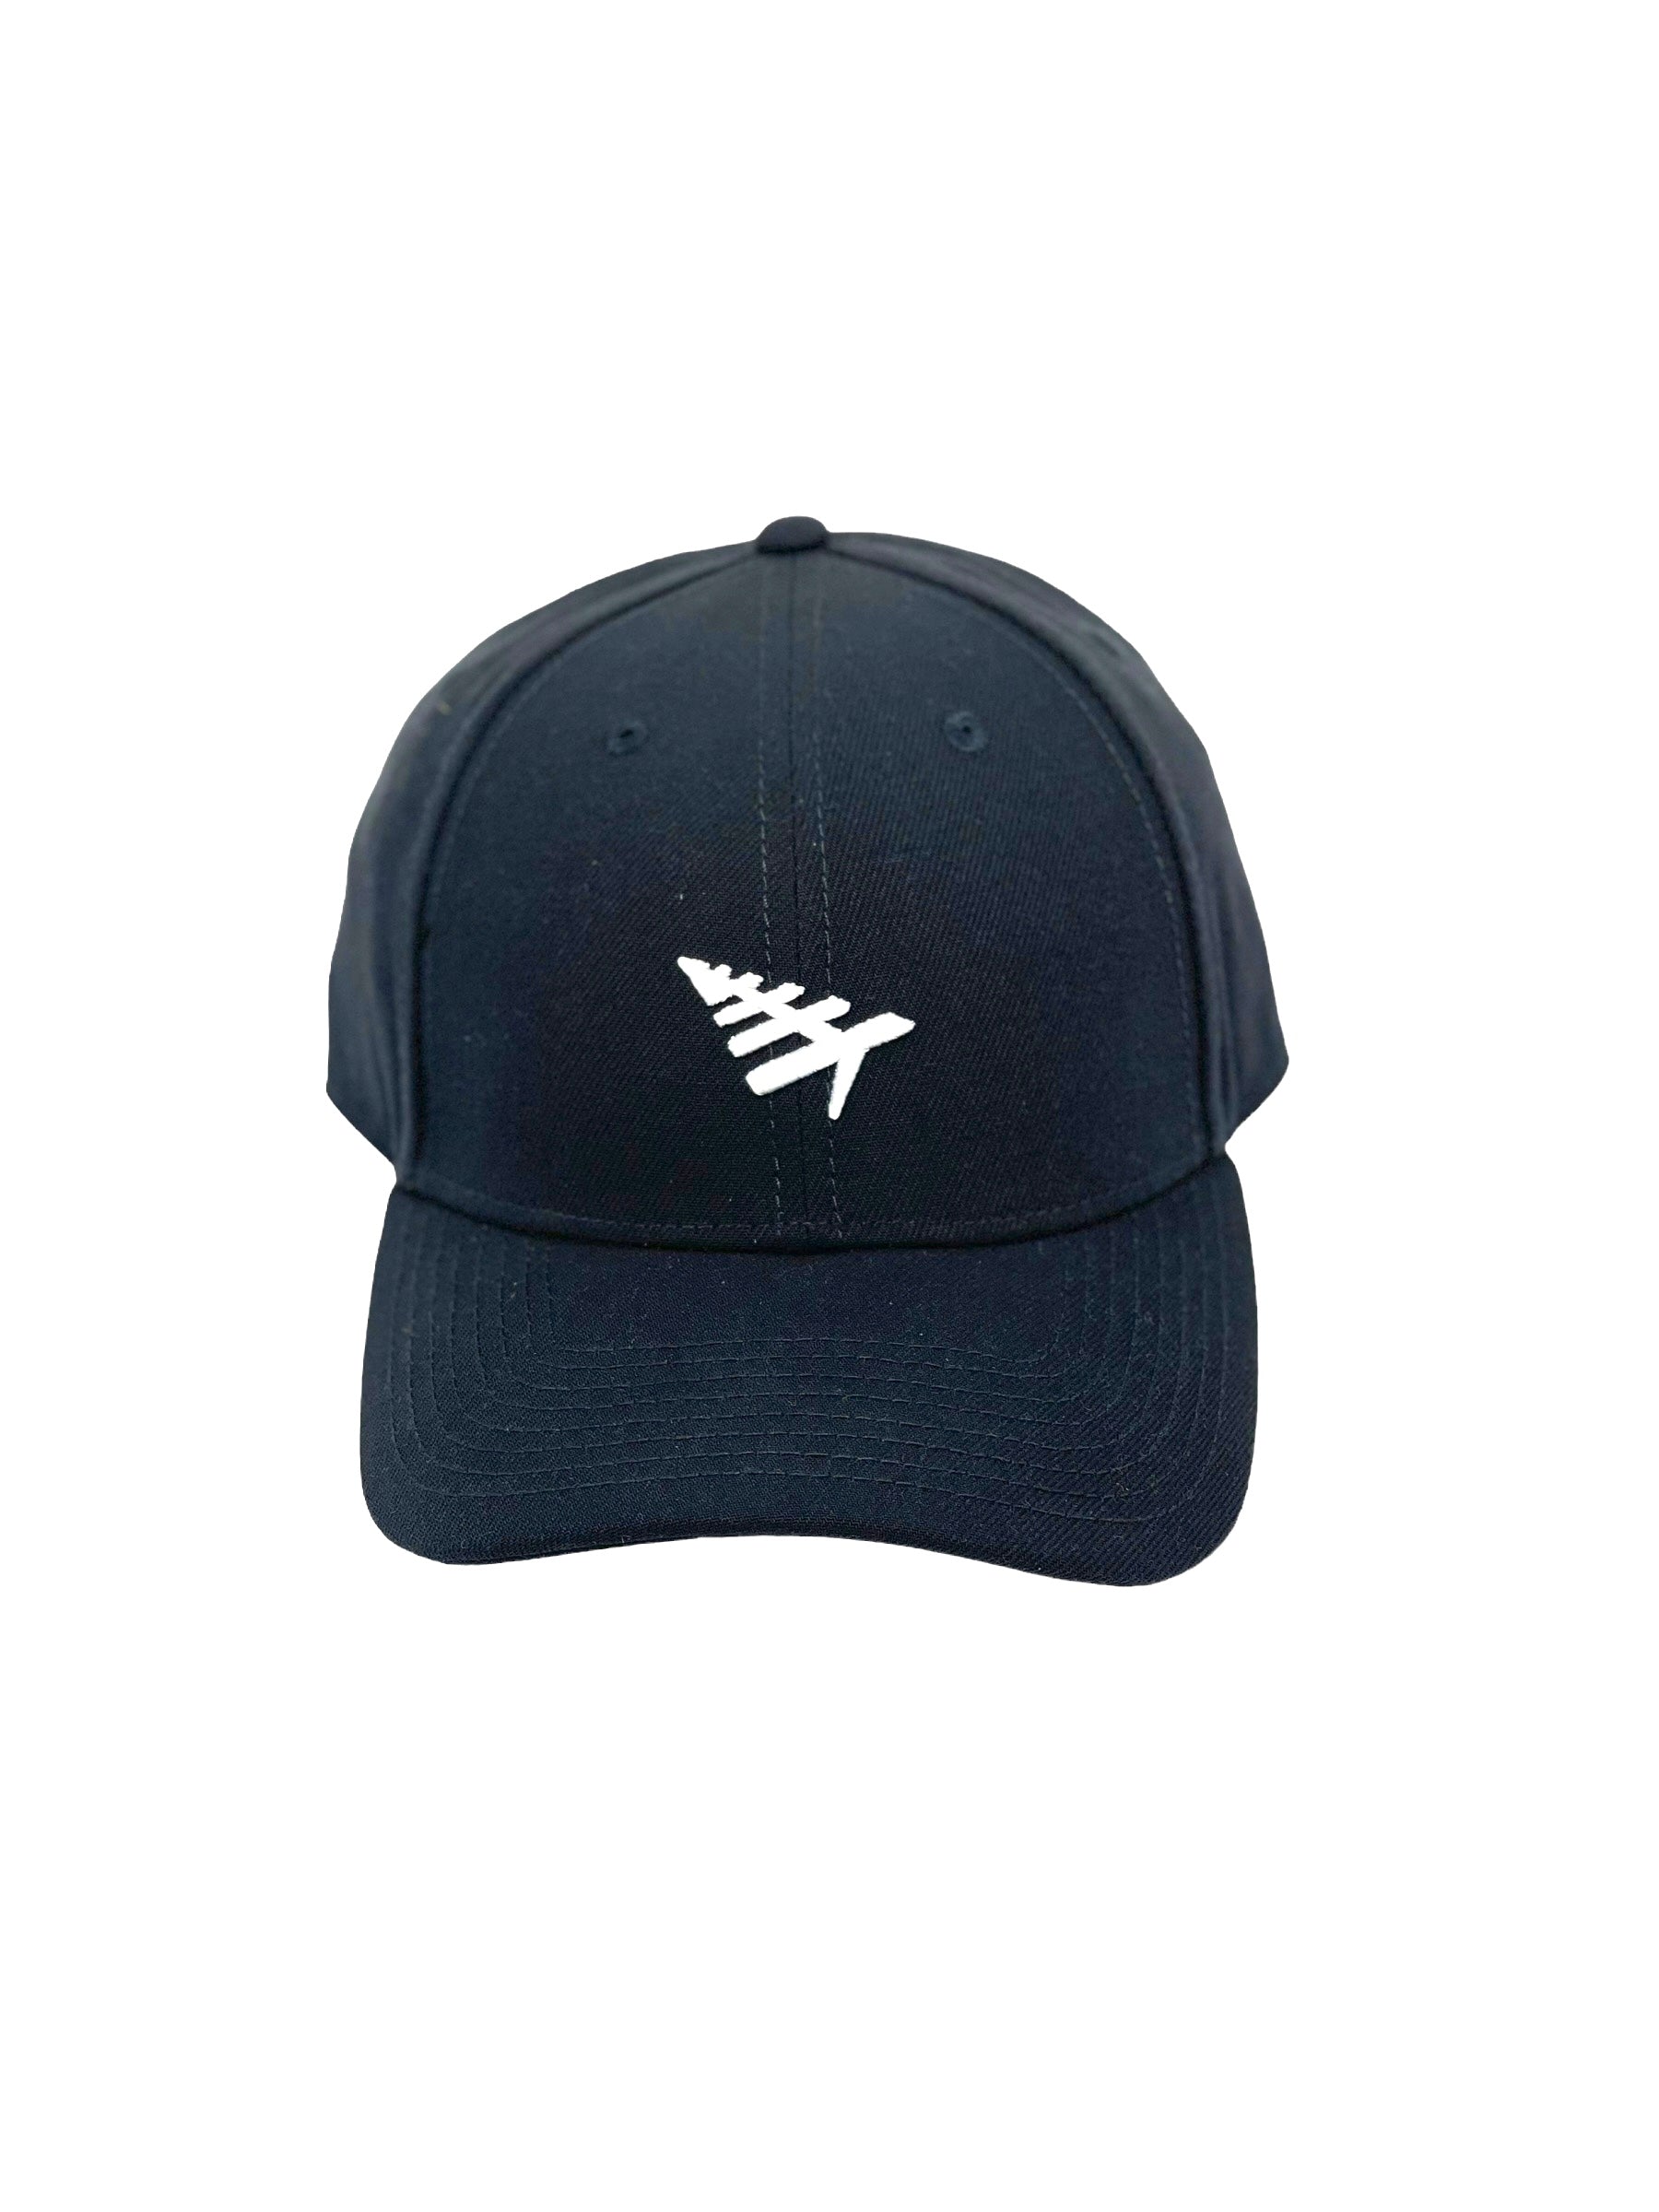 PAPER PLANES ICON II (NAVY) DAD HAT